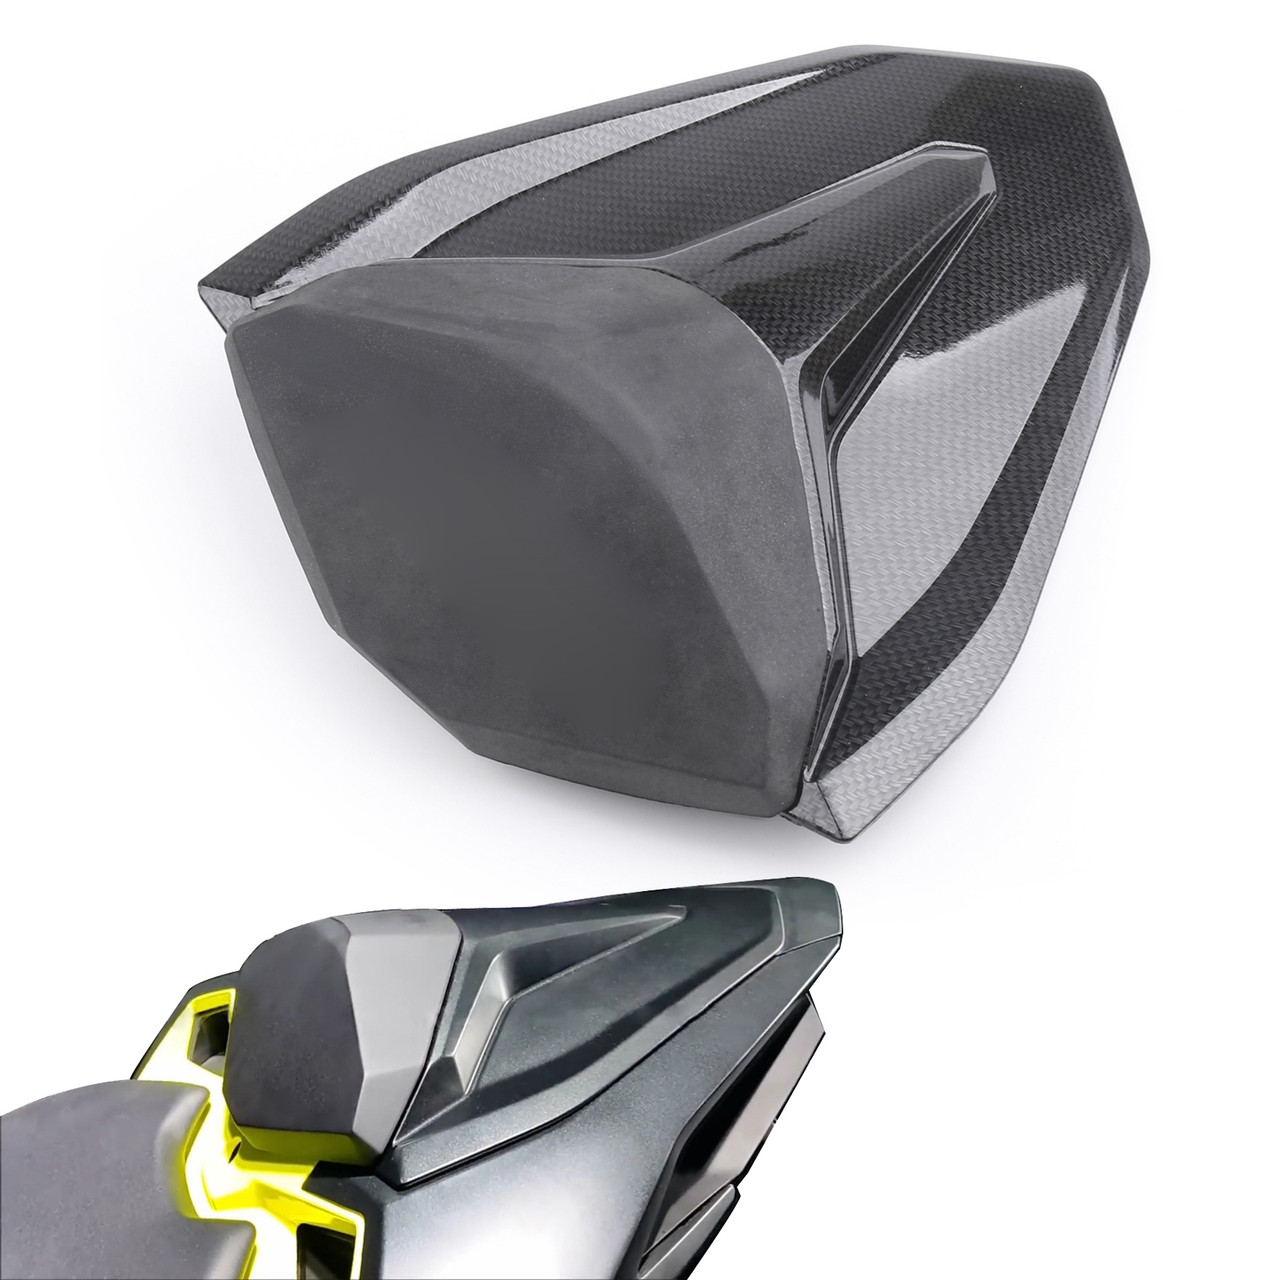 Motorcycle Pillion Rear Seat Cover Cowl ABS For Honda CBR250RR 2017-2019 Carbon